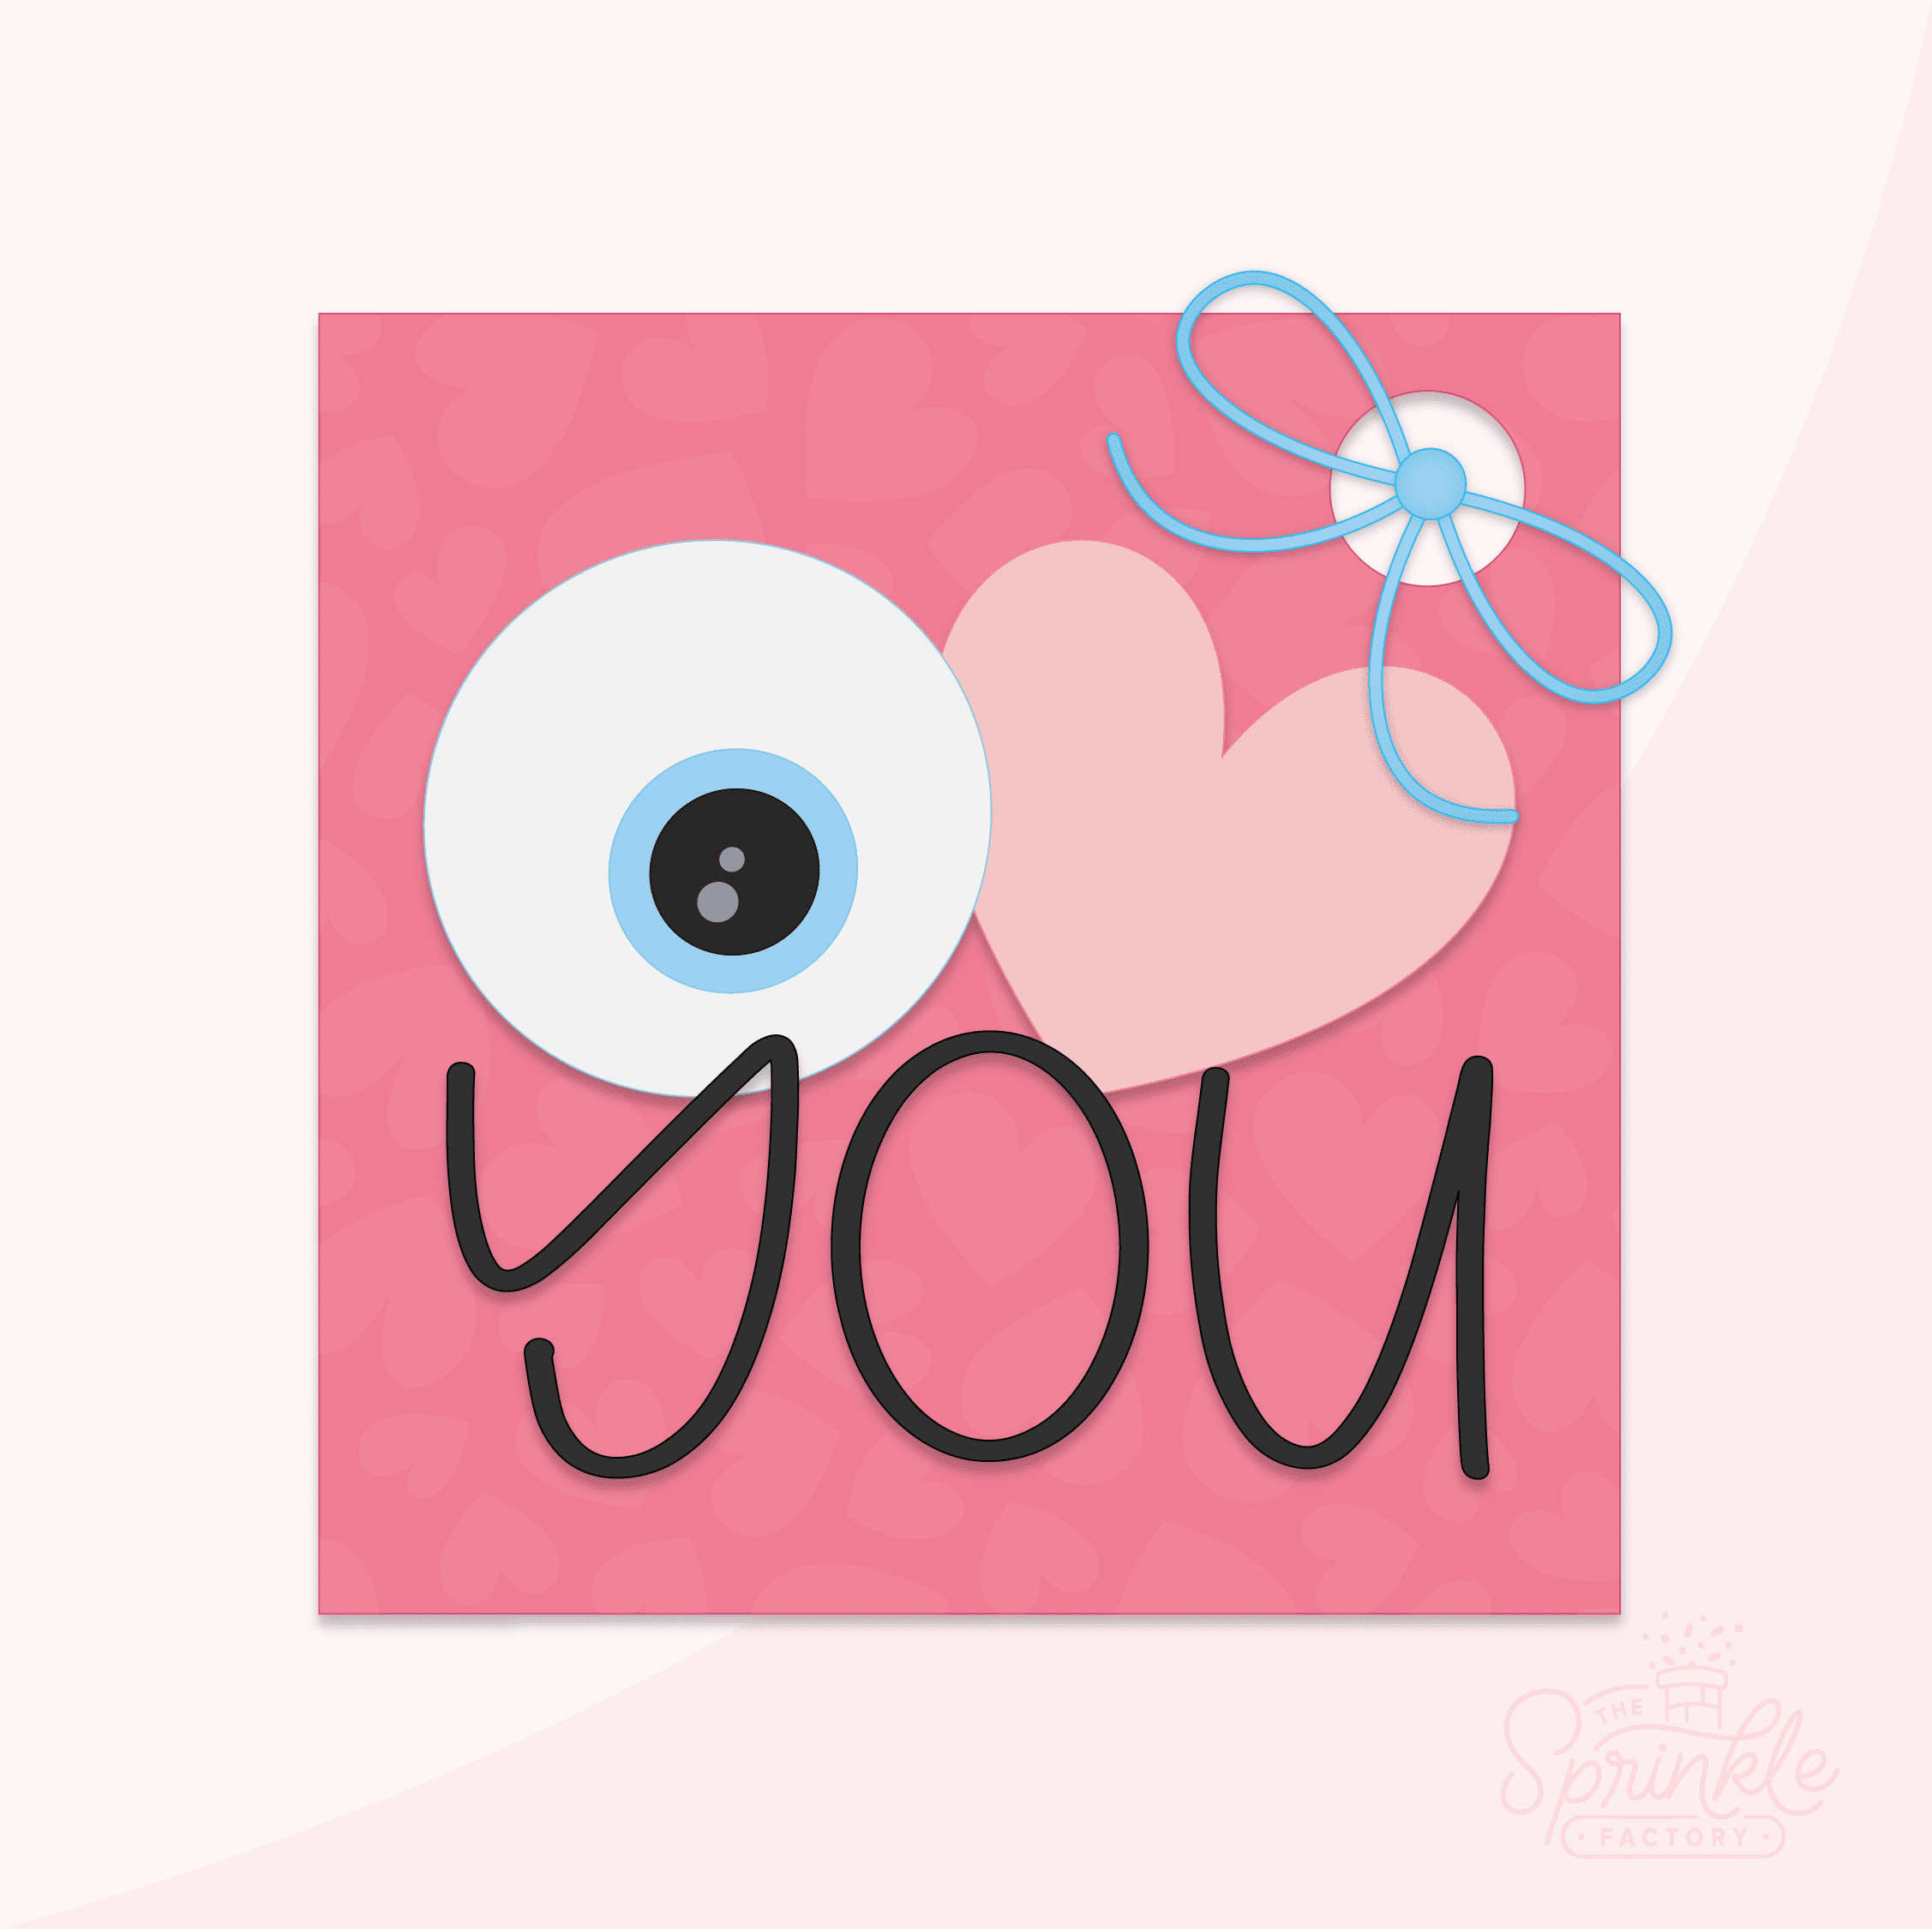 Clipart of a square tag with a hole cut out for a blue bow with a dark pink heart print on it with a big white eye with black and blue pupil with a pink heart next to it and the word YOU in black text below.